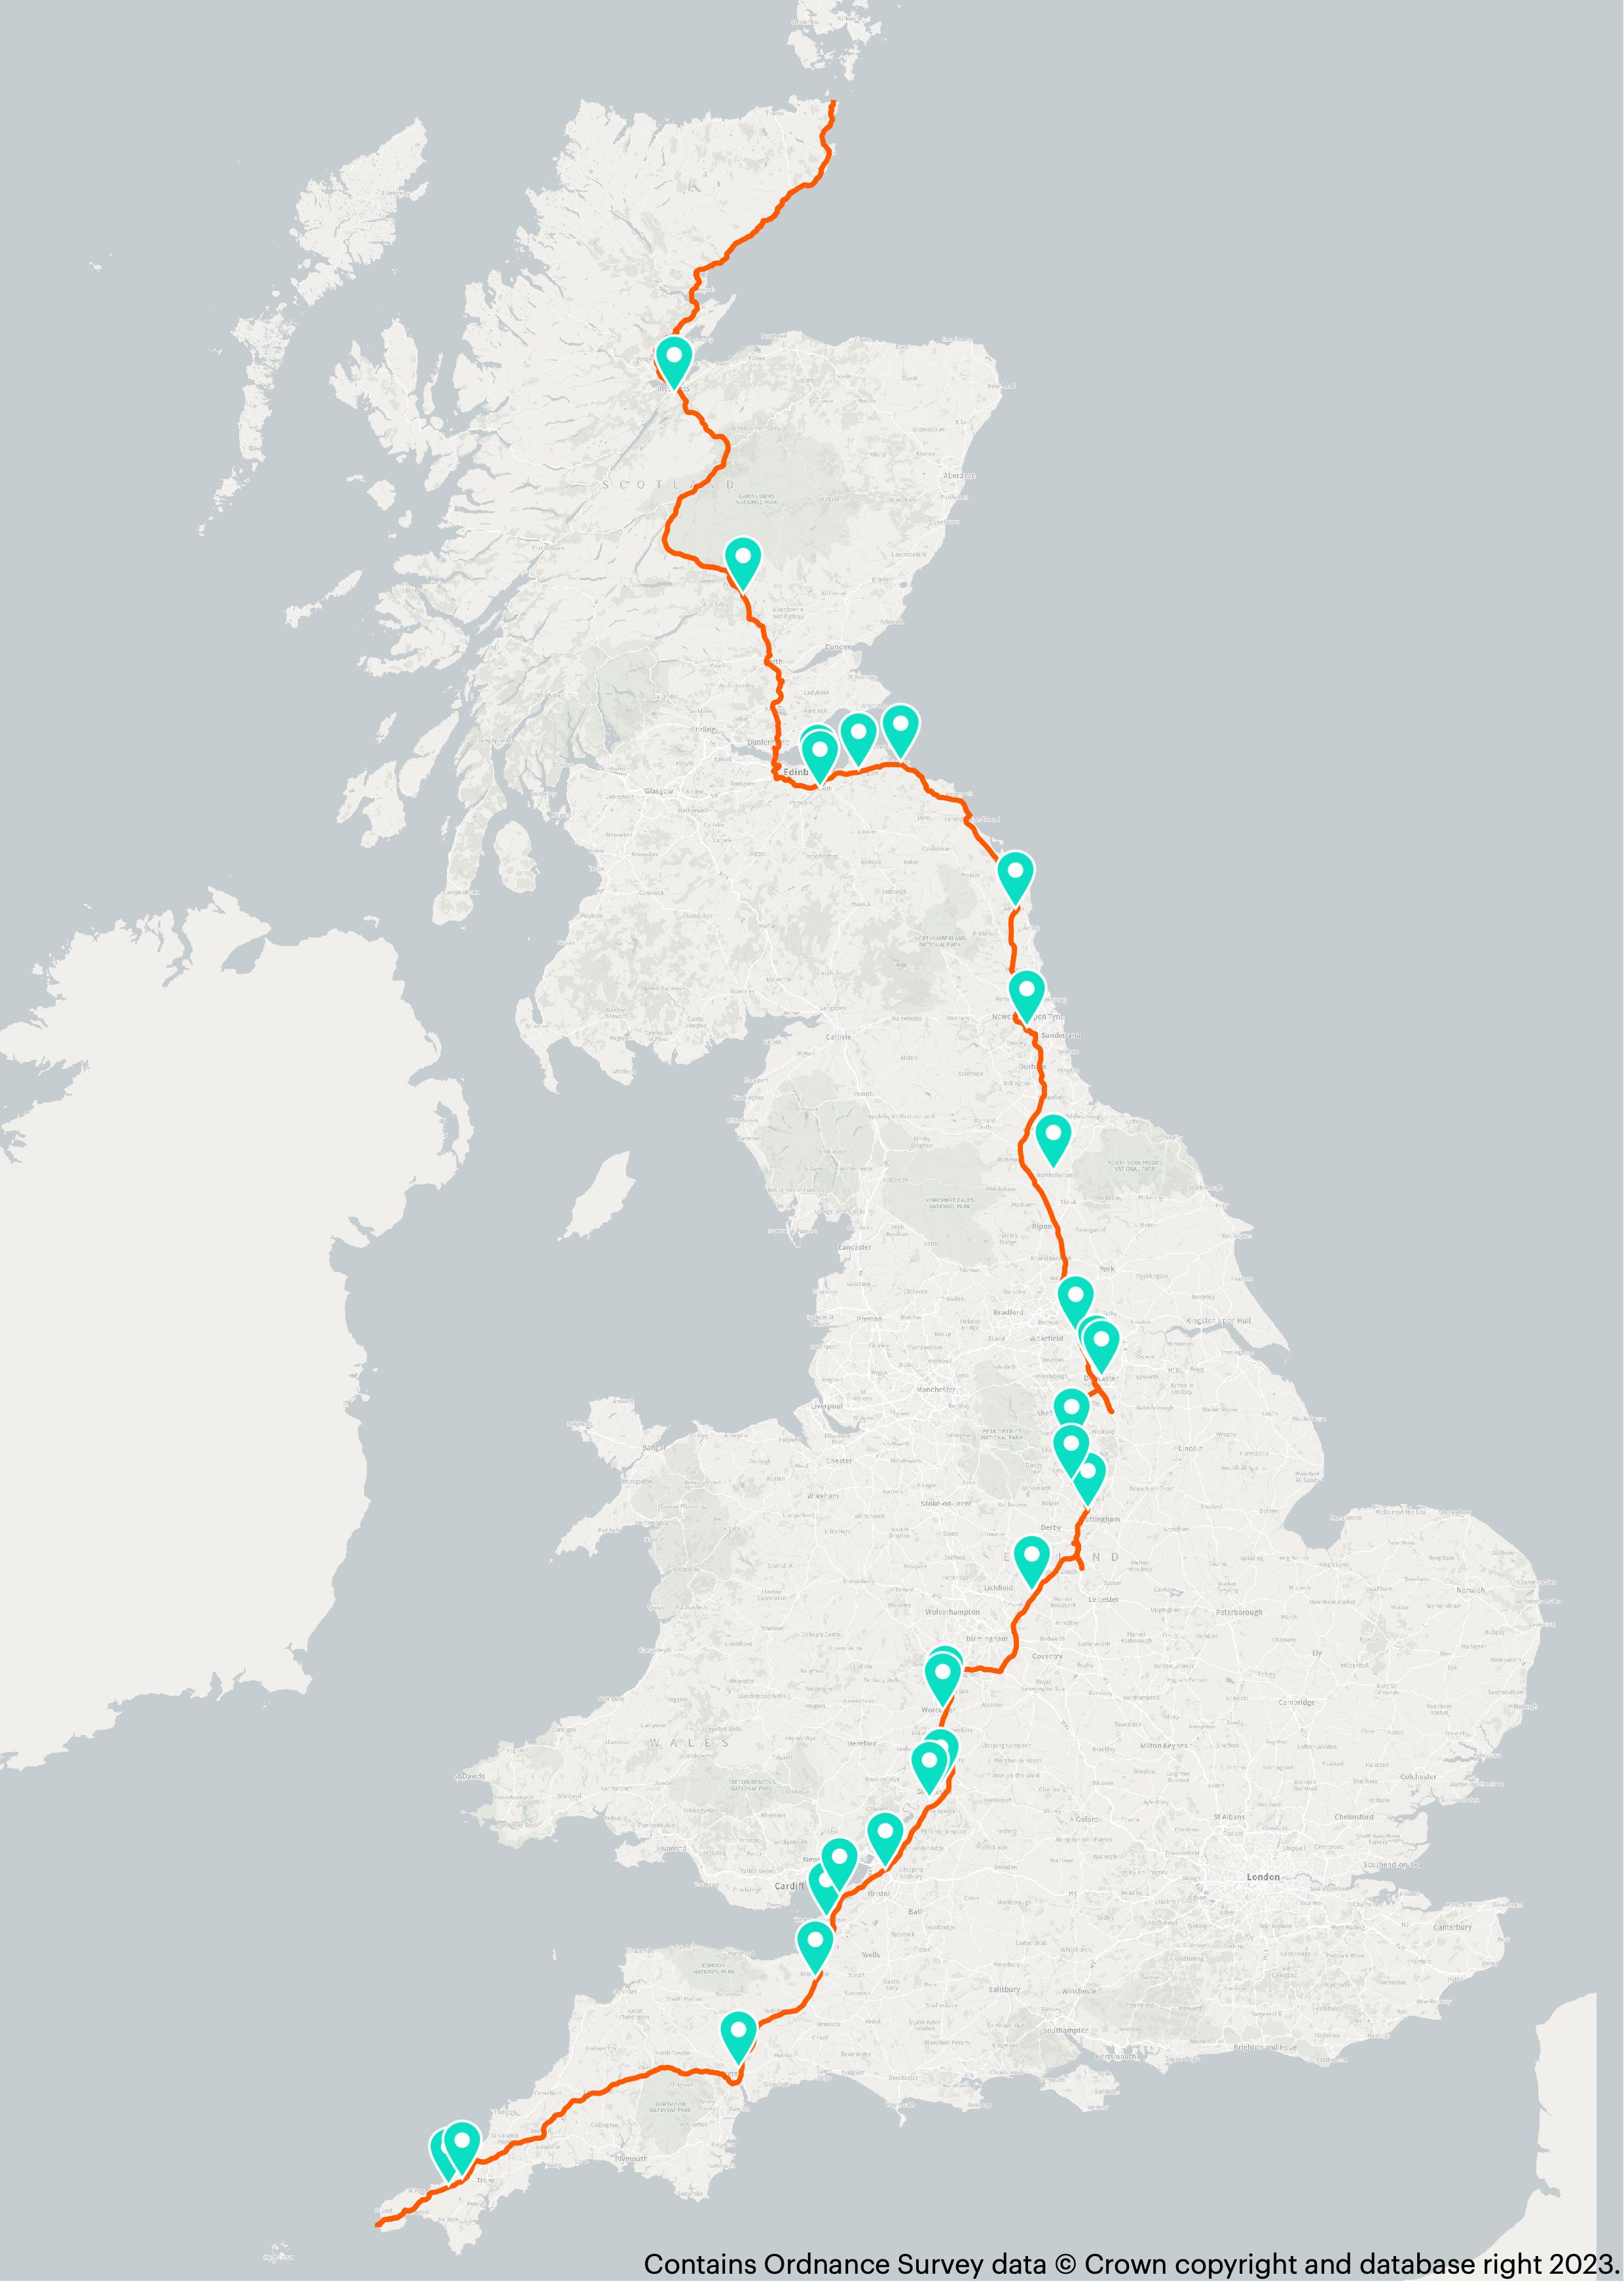 A map showing the journey from John O'Groats to Lands End with Osprey charging stations located along the way